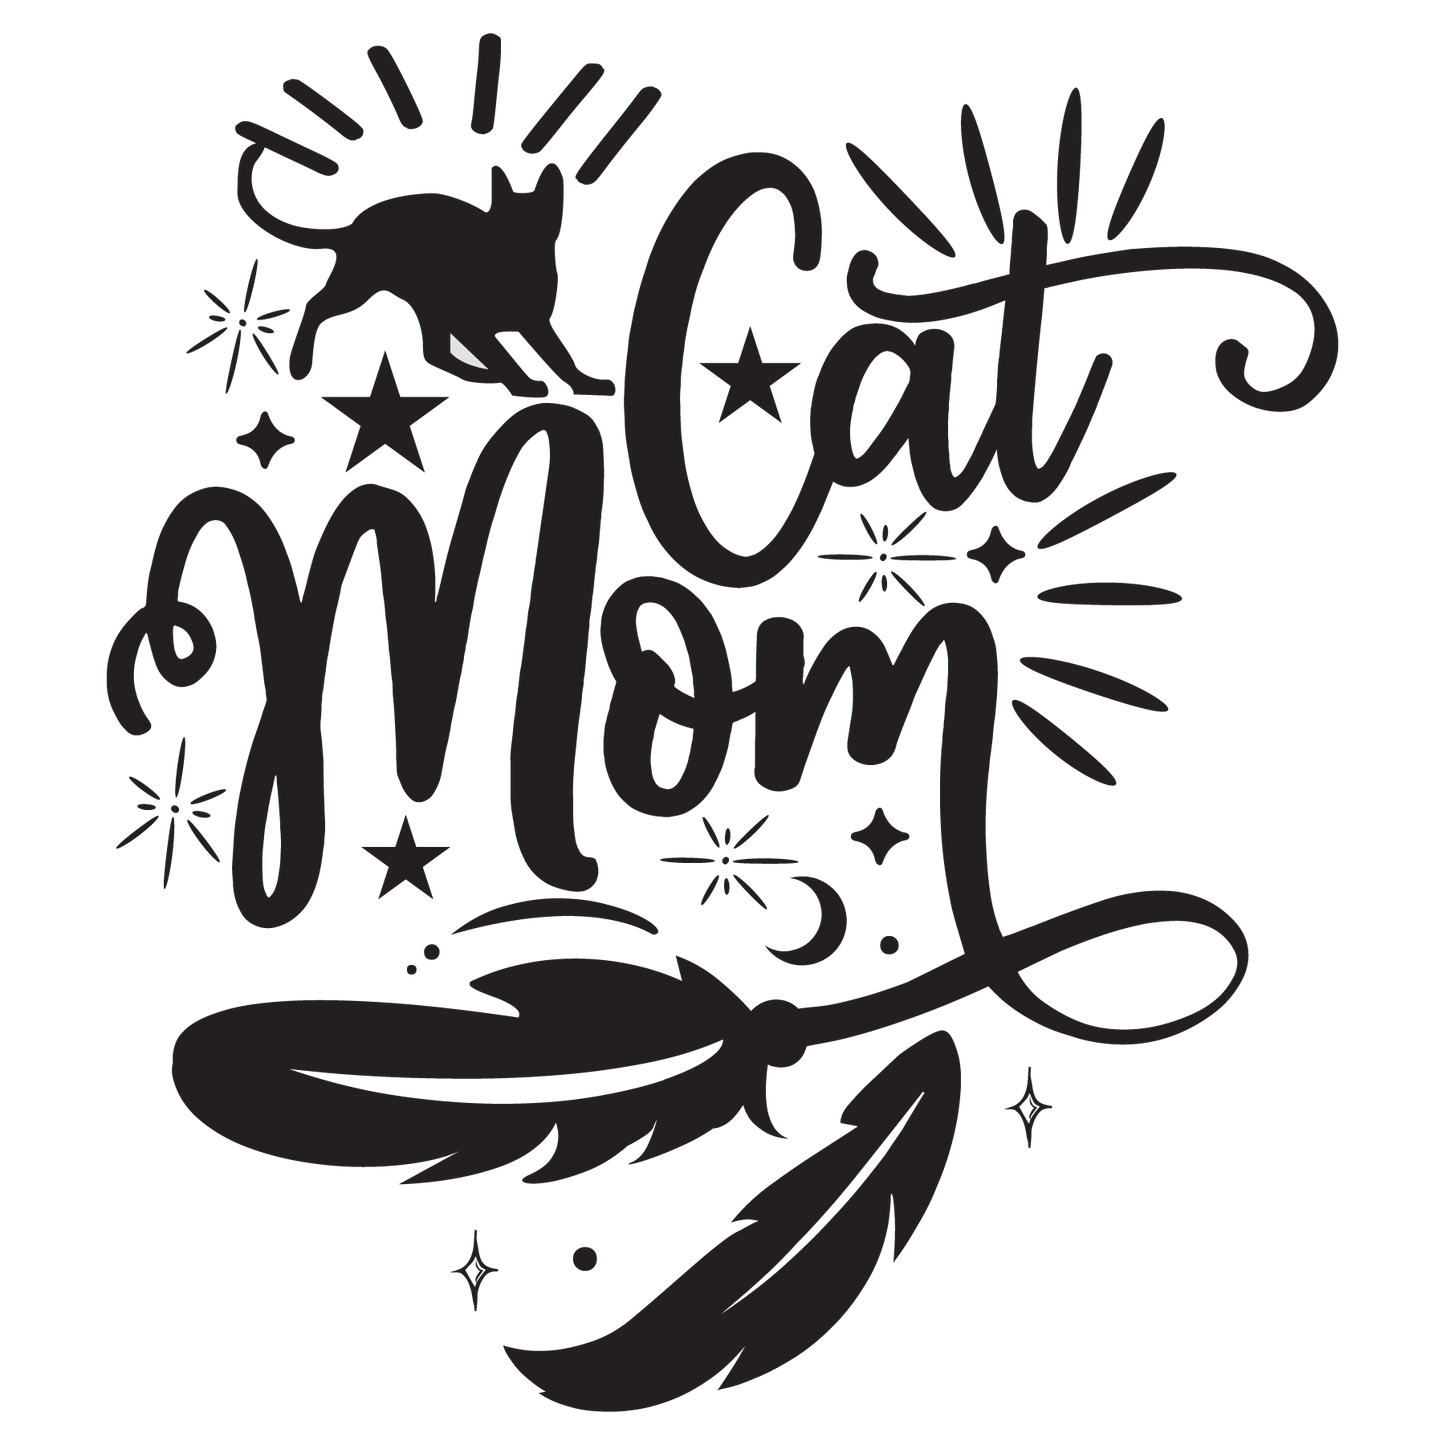 Cat Mom Coffee Mug - Home of Buy 3, Get 1 Free. Long Lasting Custom Designed Coffee Mugs for Business and Pleasure. Perfect for Christmas, Housewarming, Wedding Party gifts